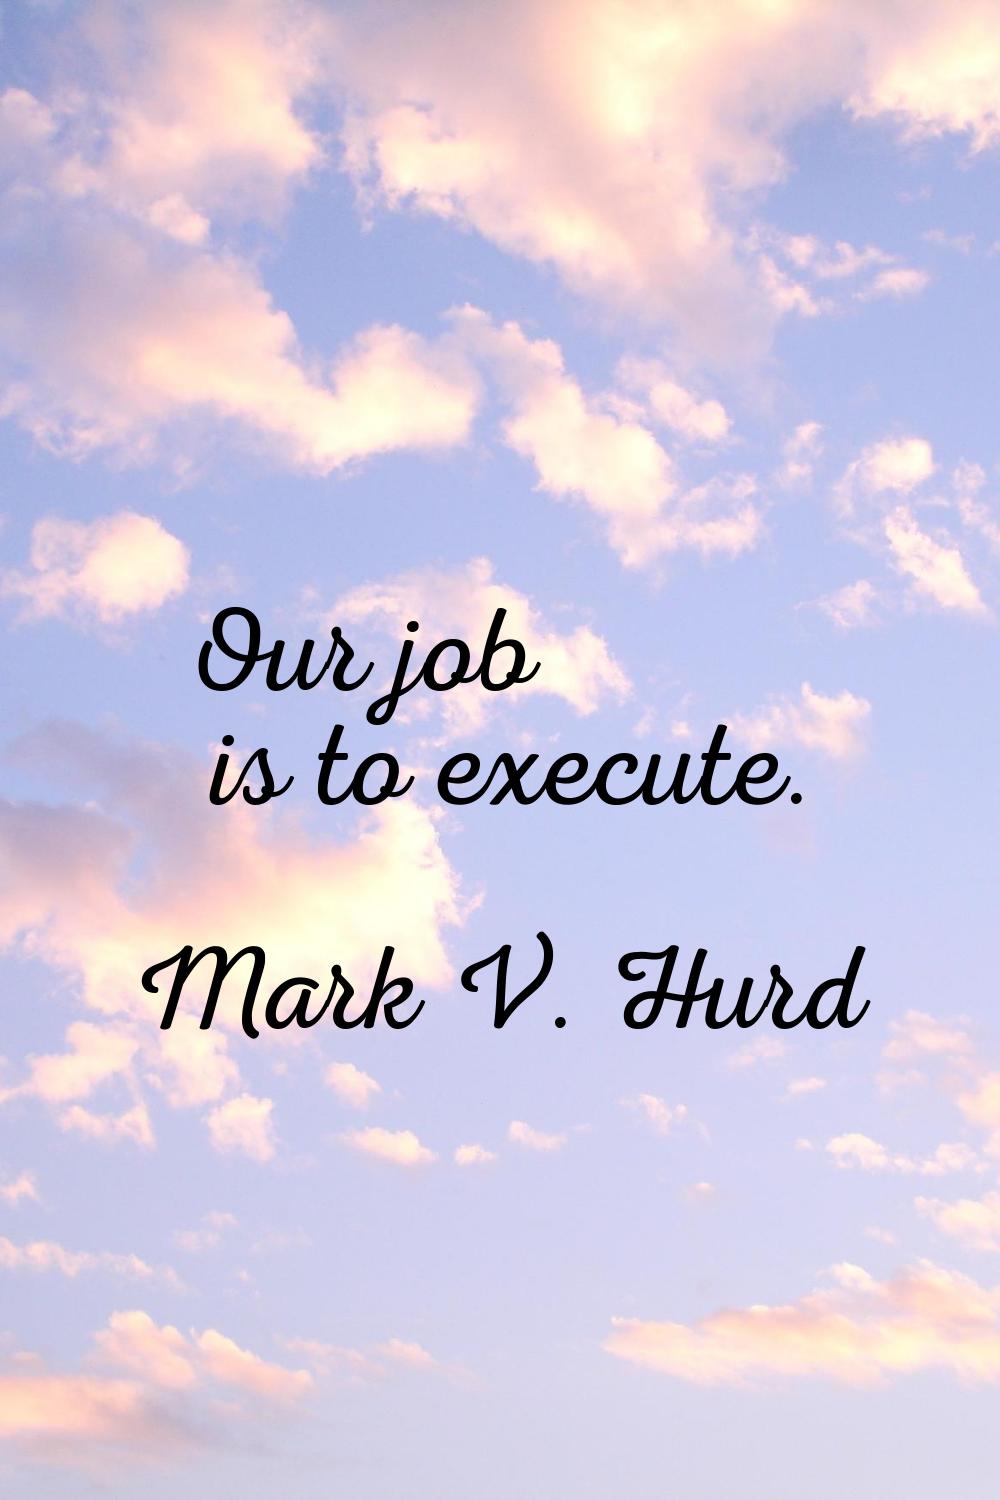 Our job is to execute.